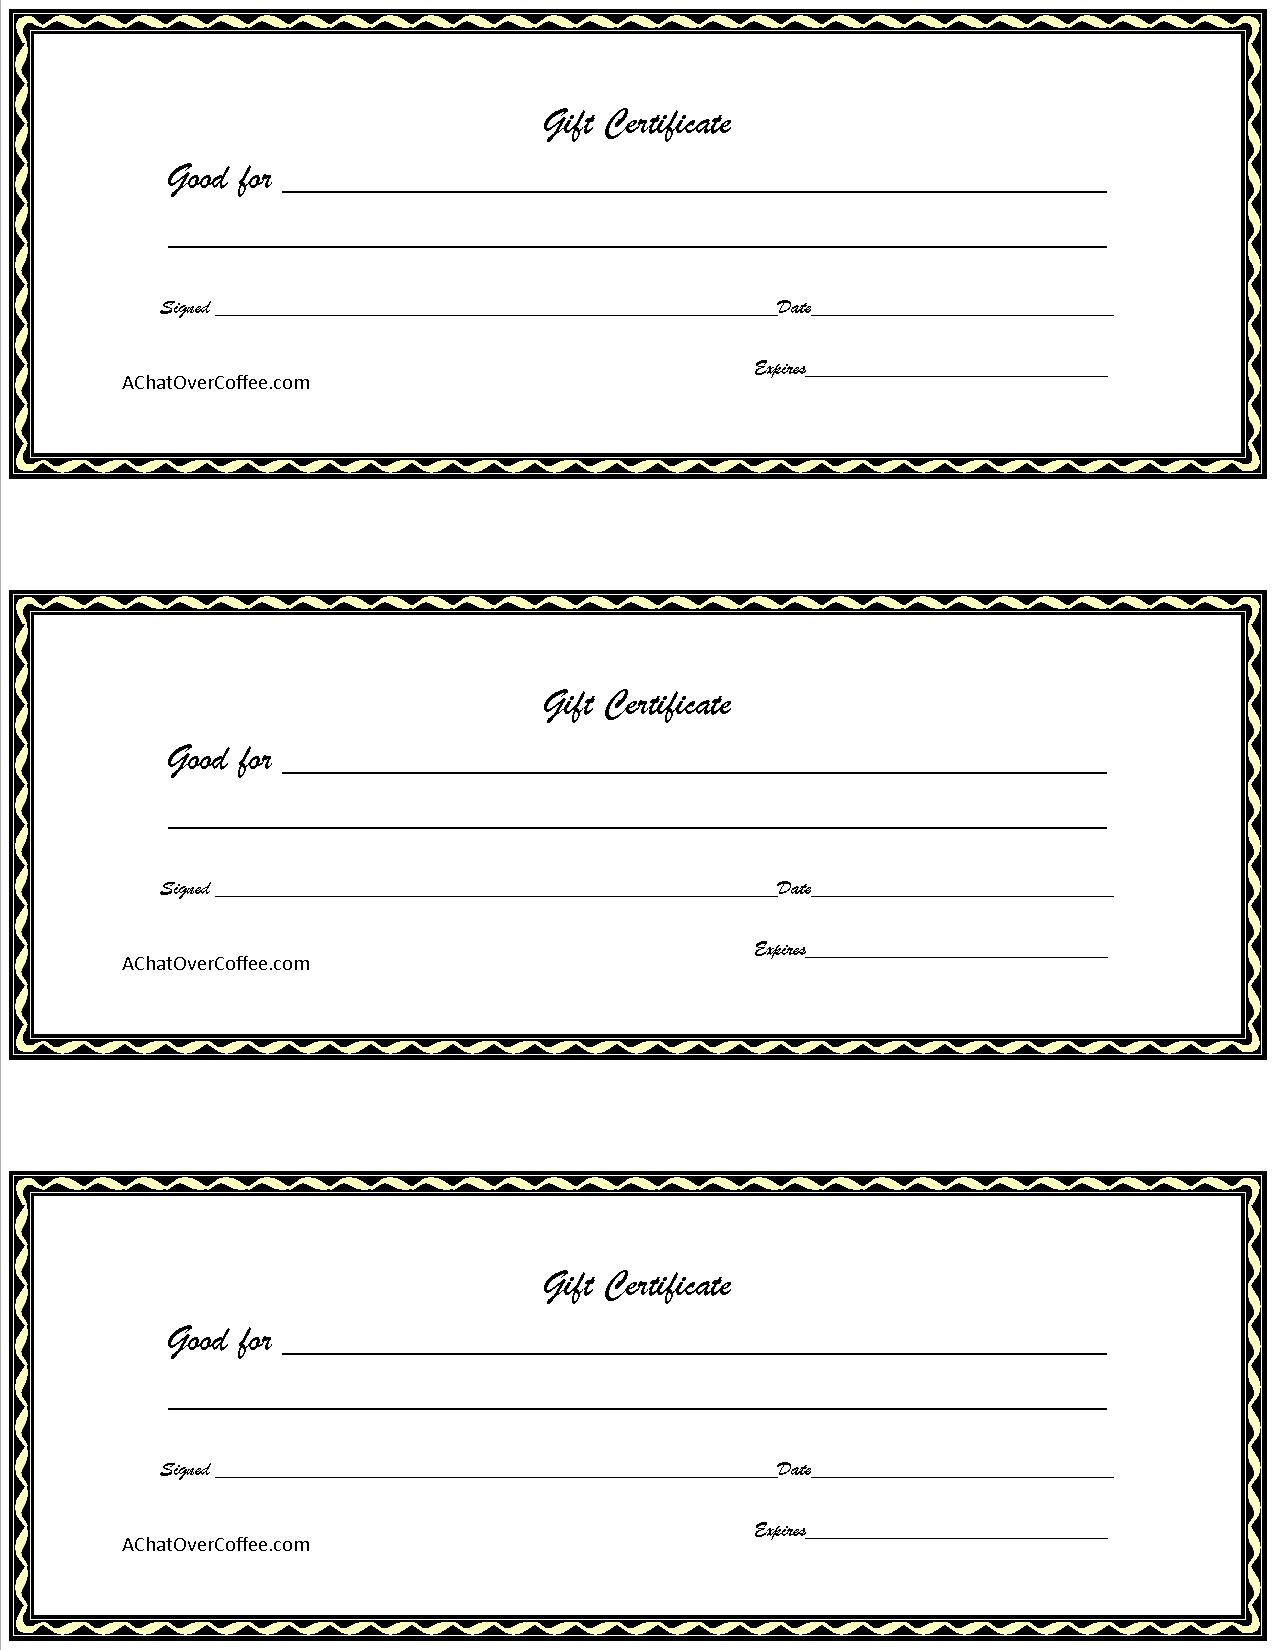 28 Cool Printable Gift Certificates – Kitty Baby Love. Gift 